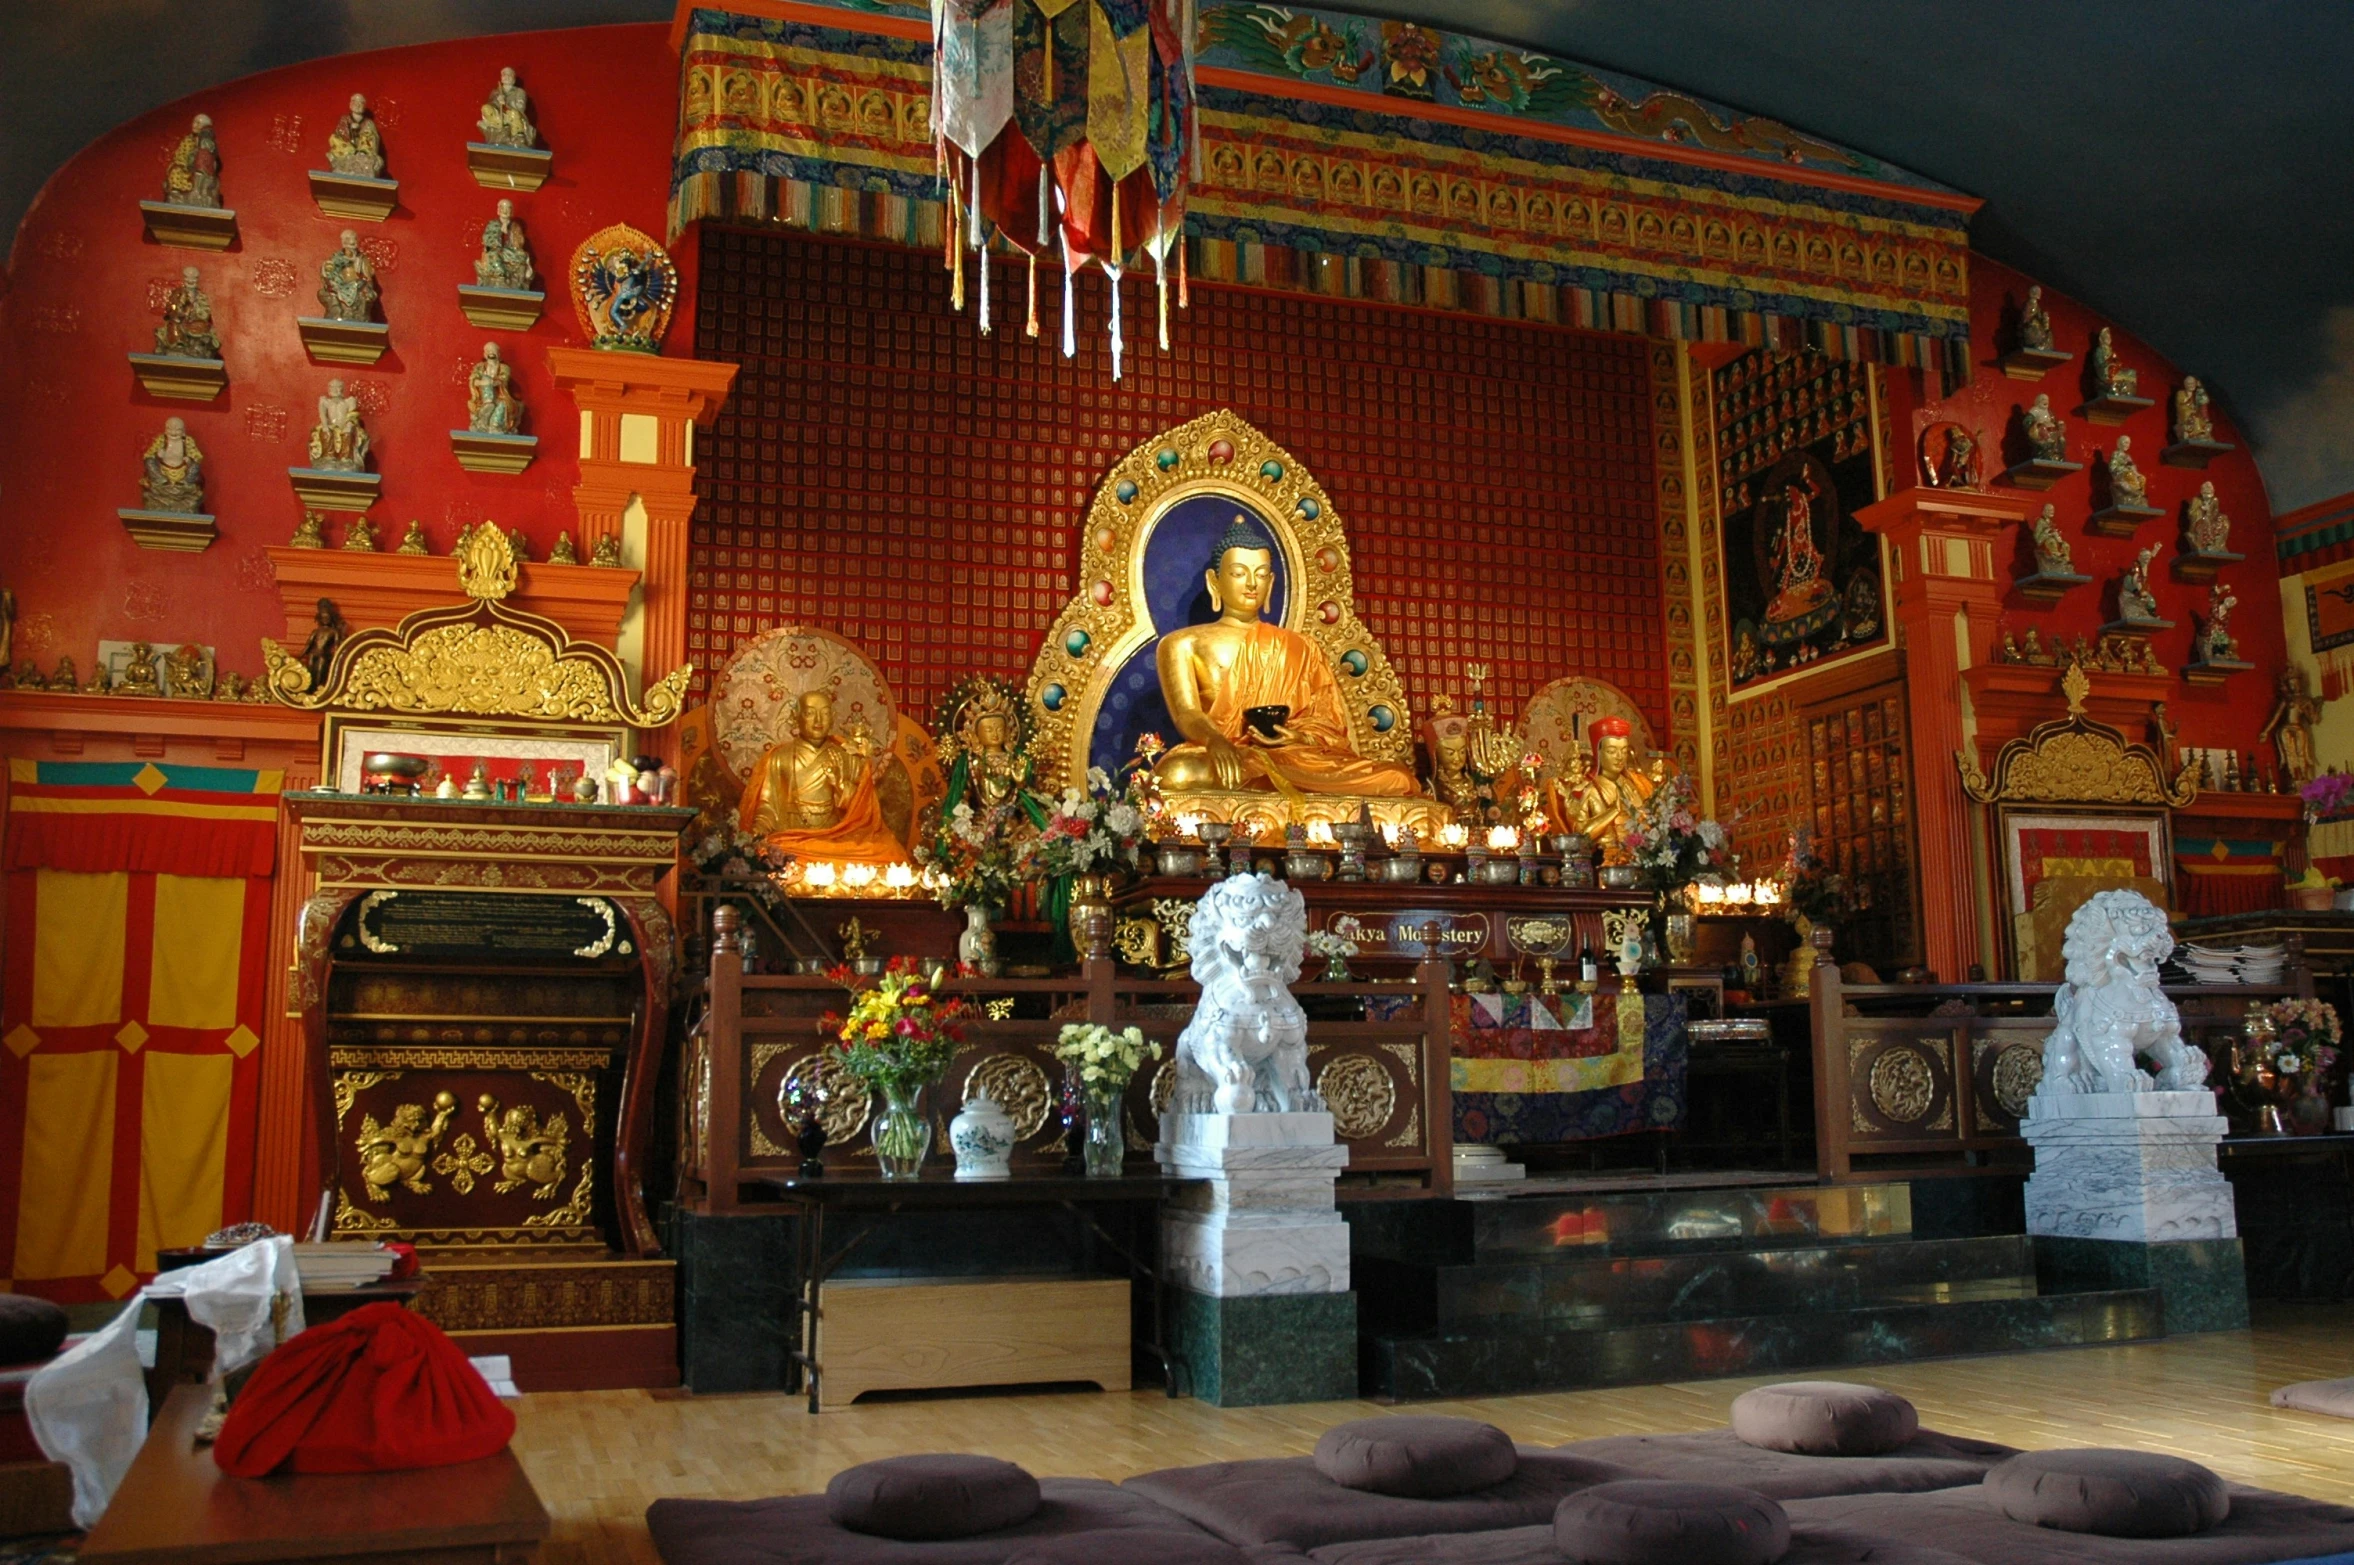 a colorful and decorated temple with white statues